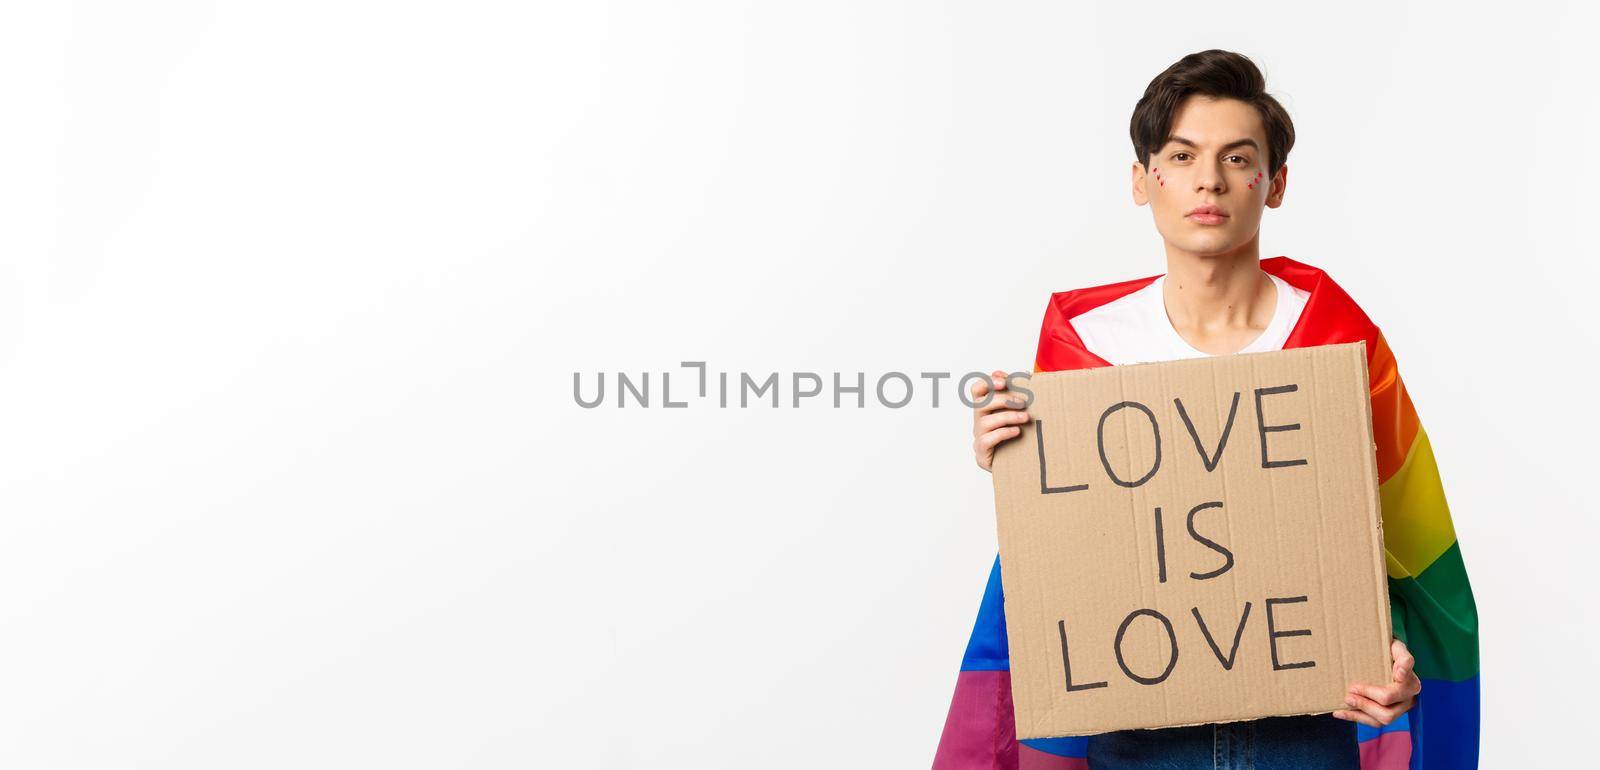 Serious and confident gay man wearing rainbow lgbt flag, holding sign for pride parade, standing over white background.